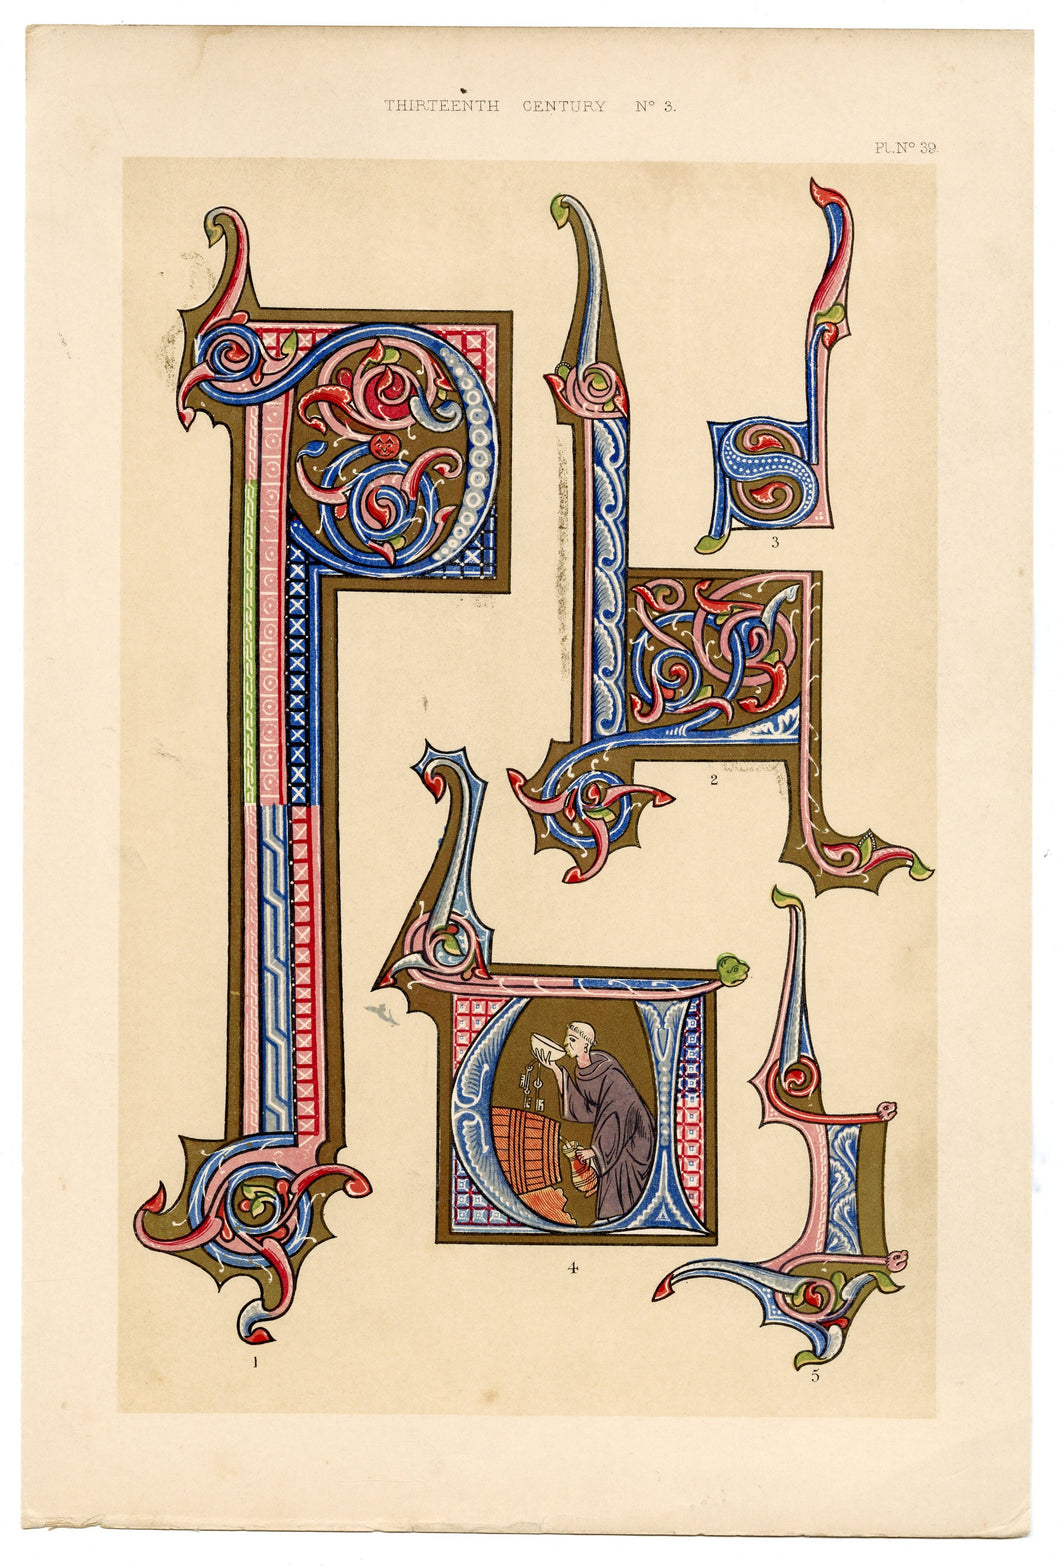 Beautiful Chromolithograph Book Plate Illuminated Letters About 125 Years Old Plate Number 39